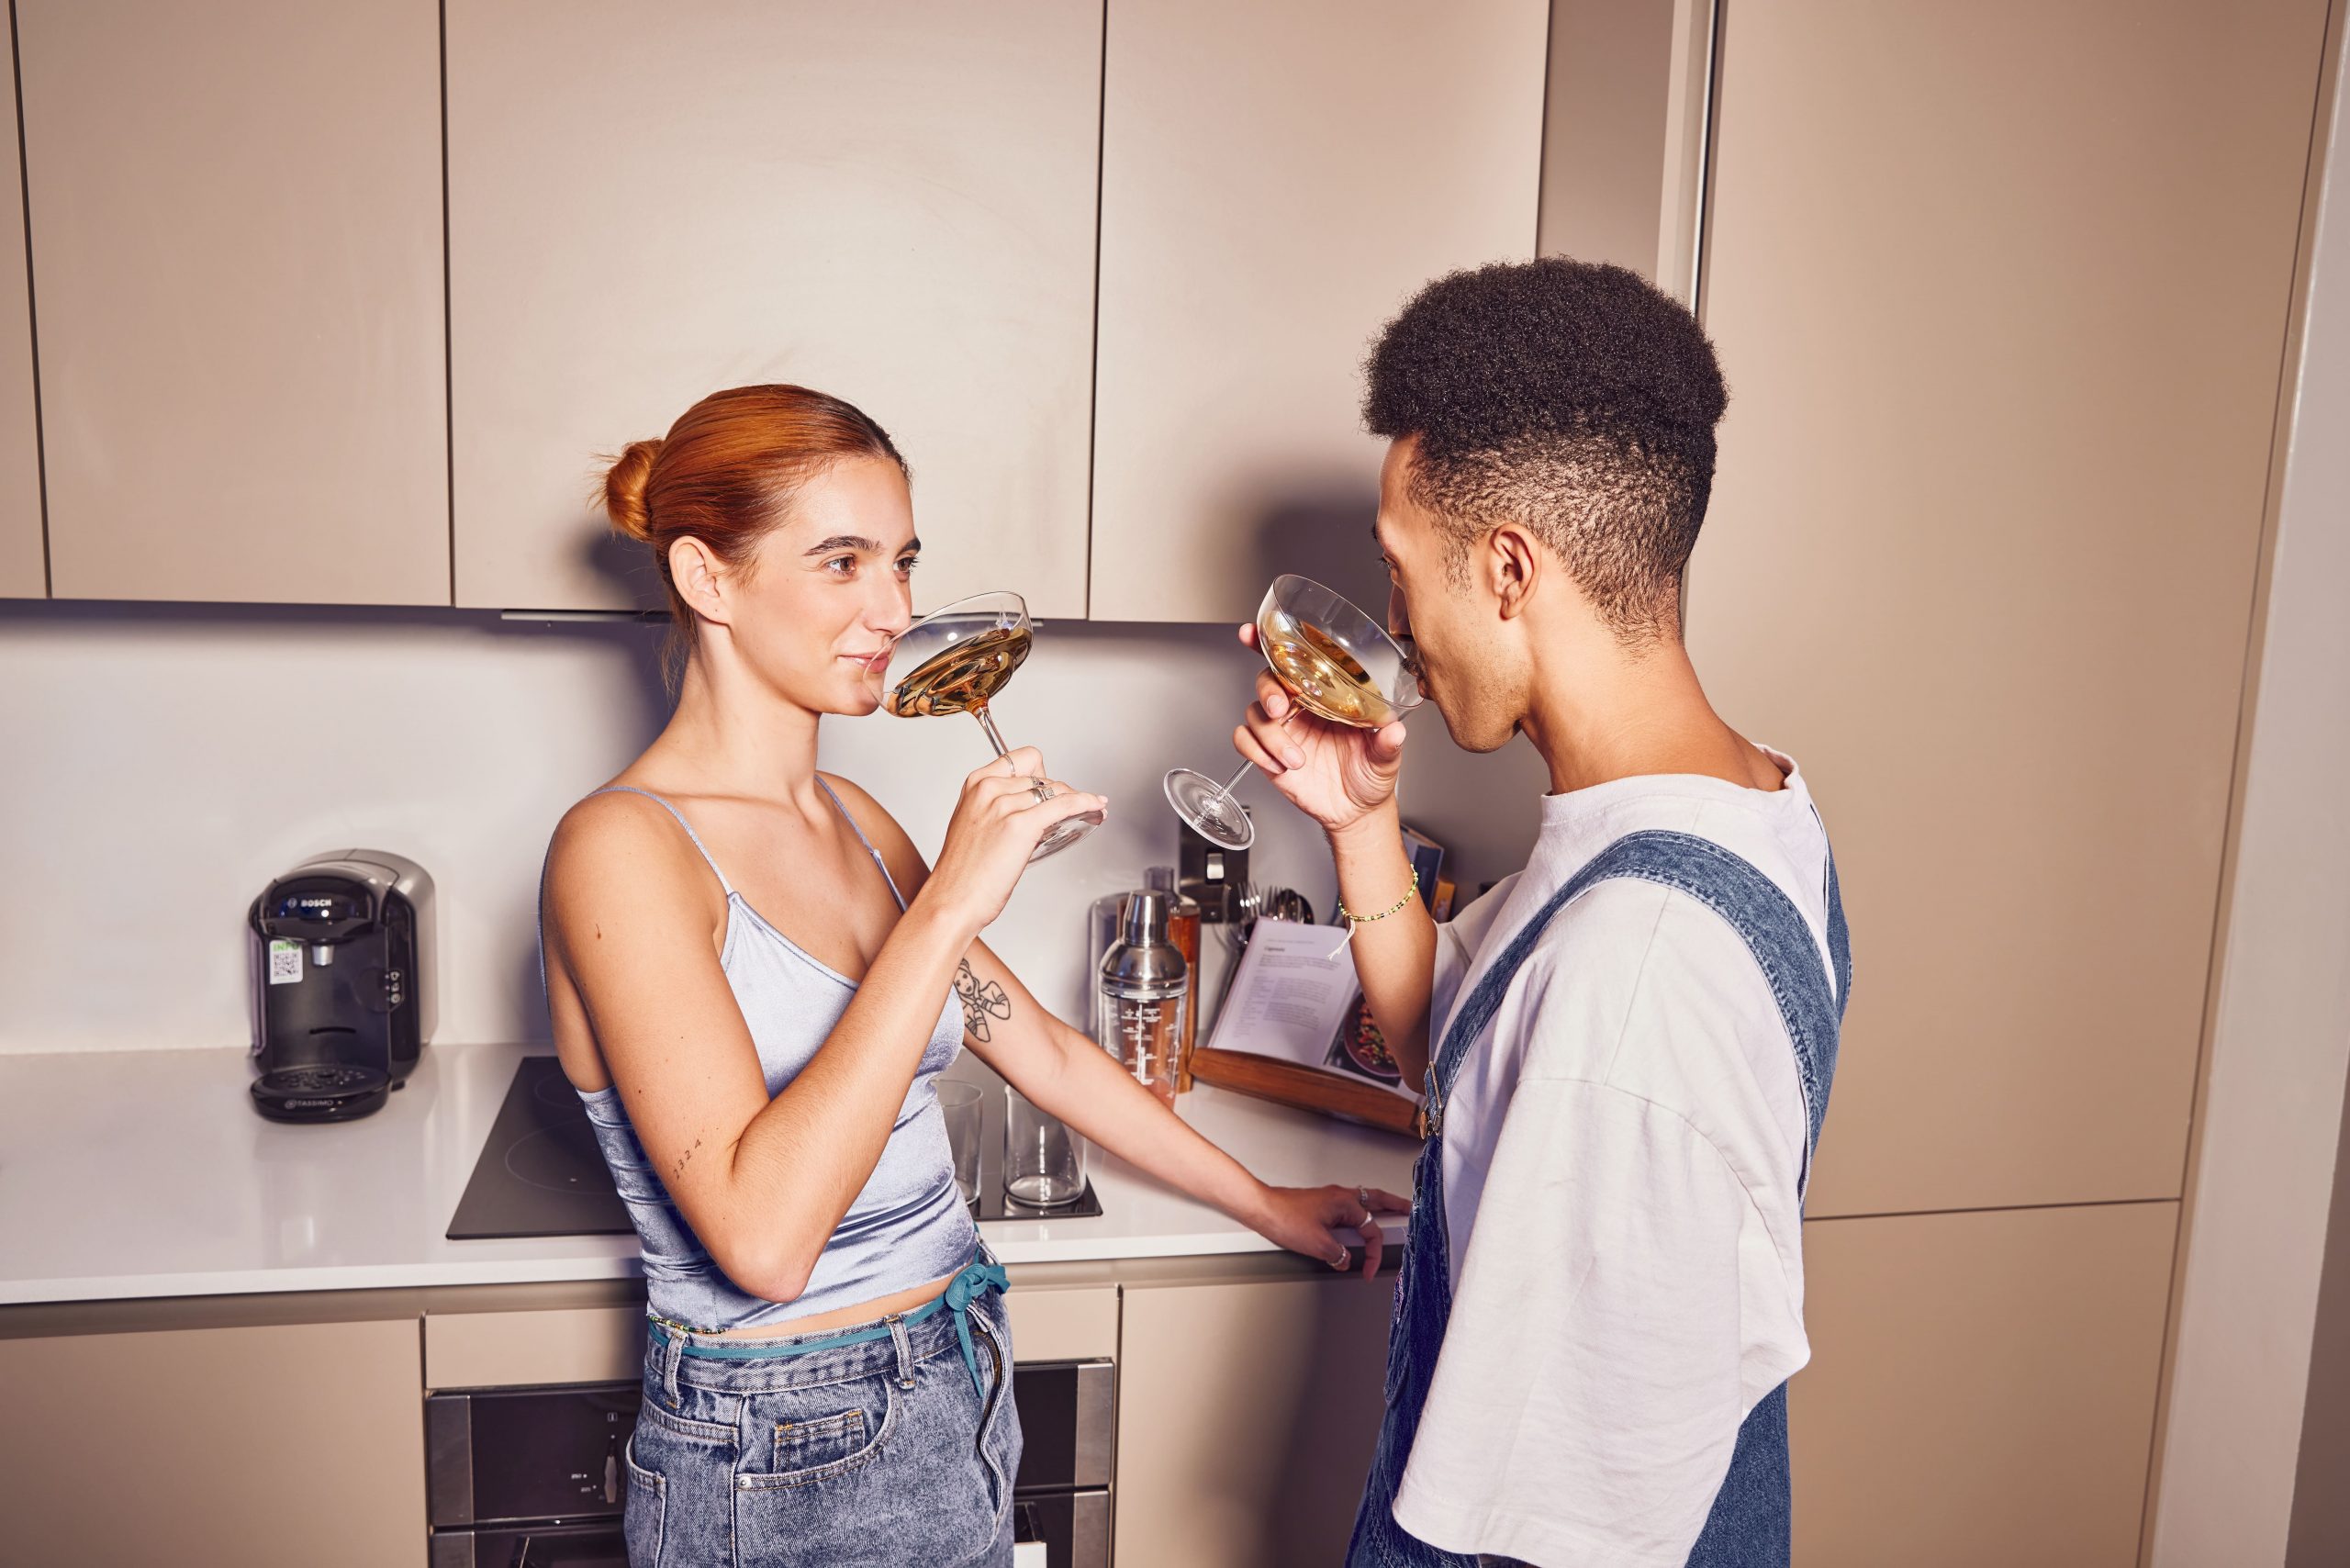 Two young people drink from high-quality glasses in a modern kitchen.